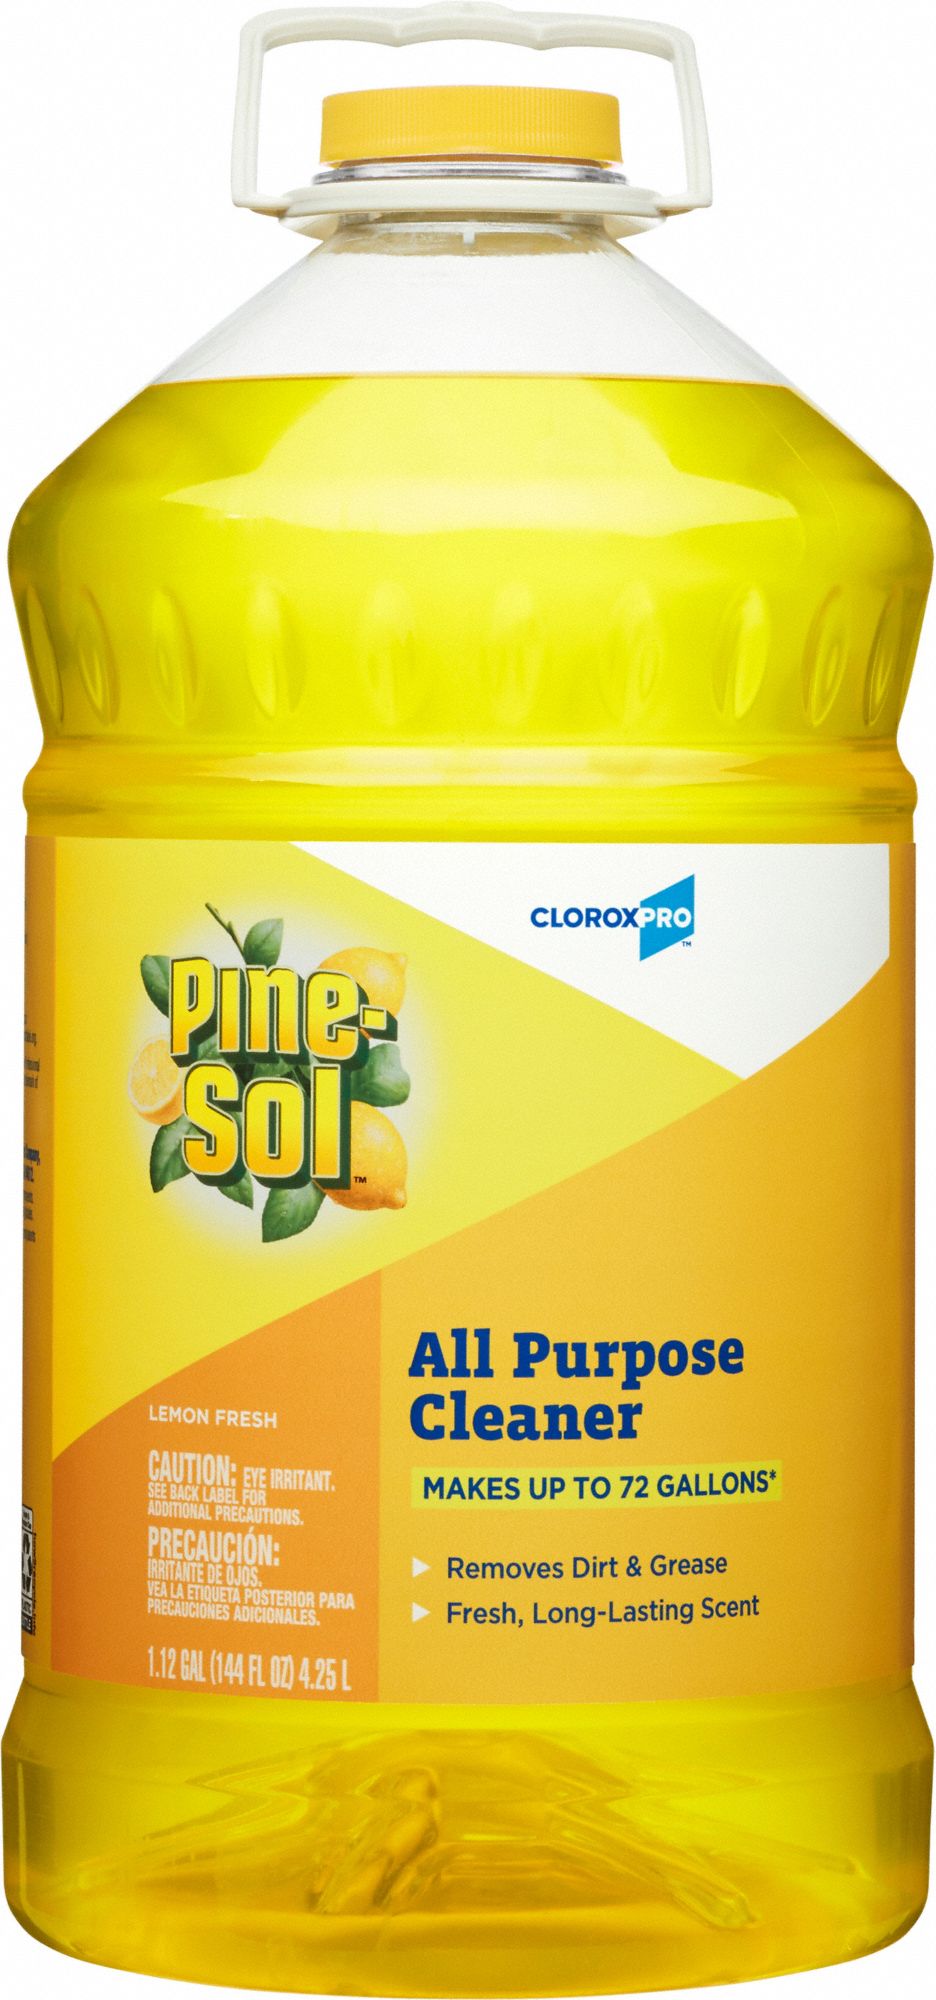 All Purpose Cleaner: Bottle, 144 oz Container Size, Ready to Use, Lemon, Alkaline, 3 PK